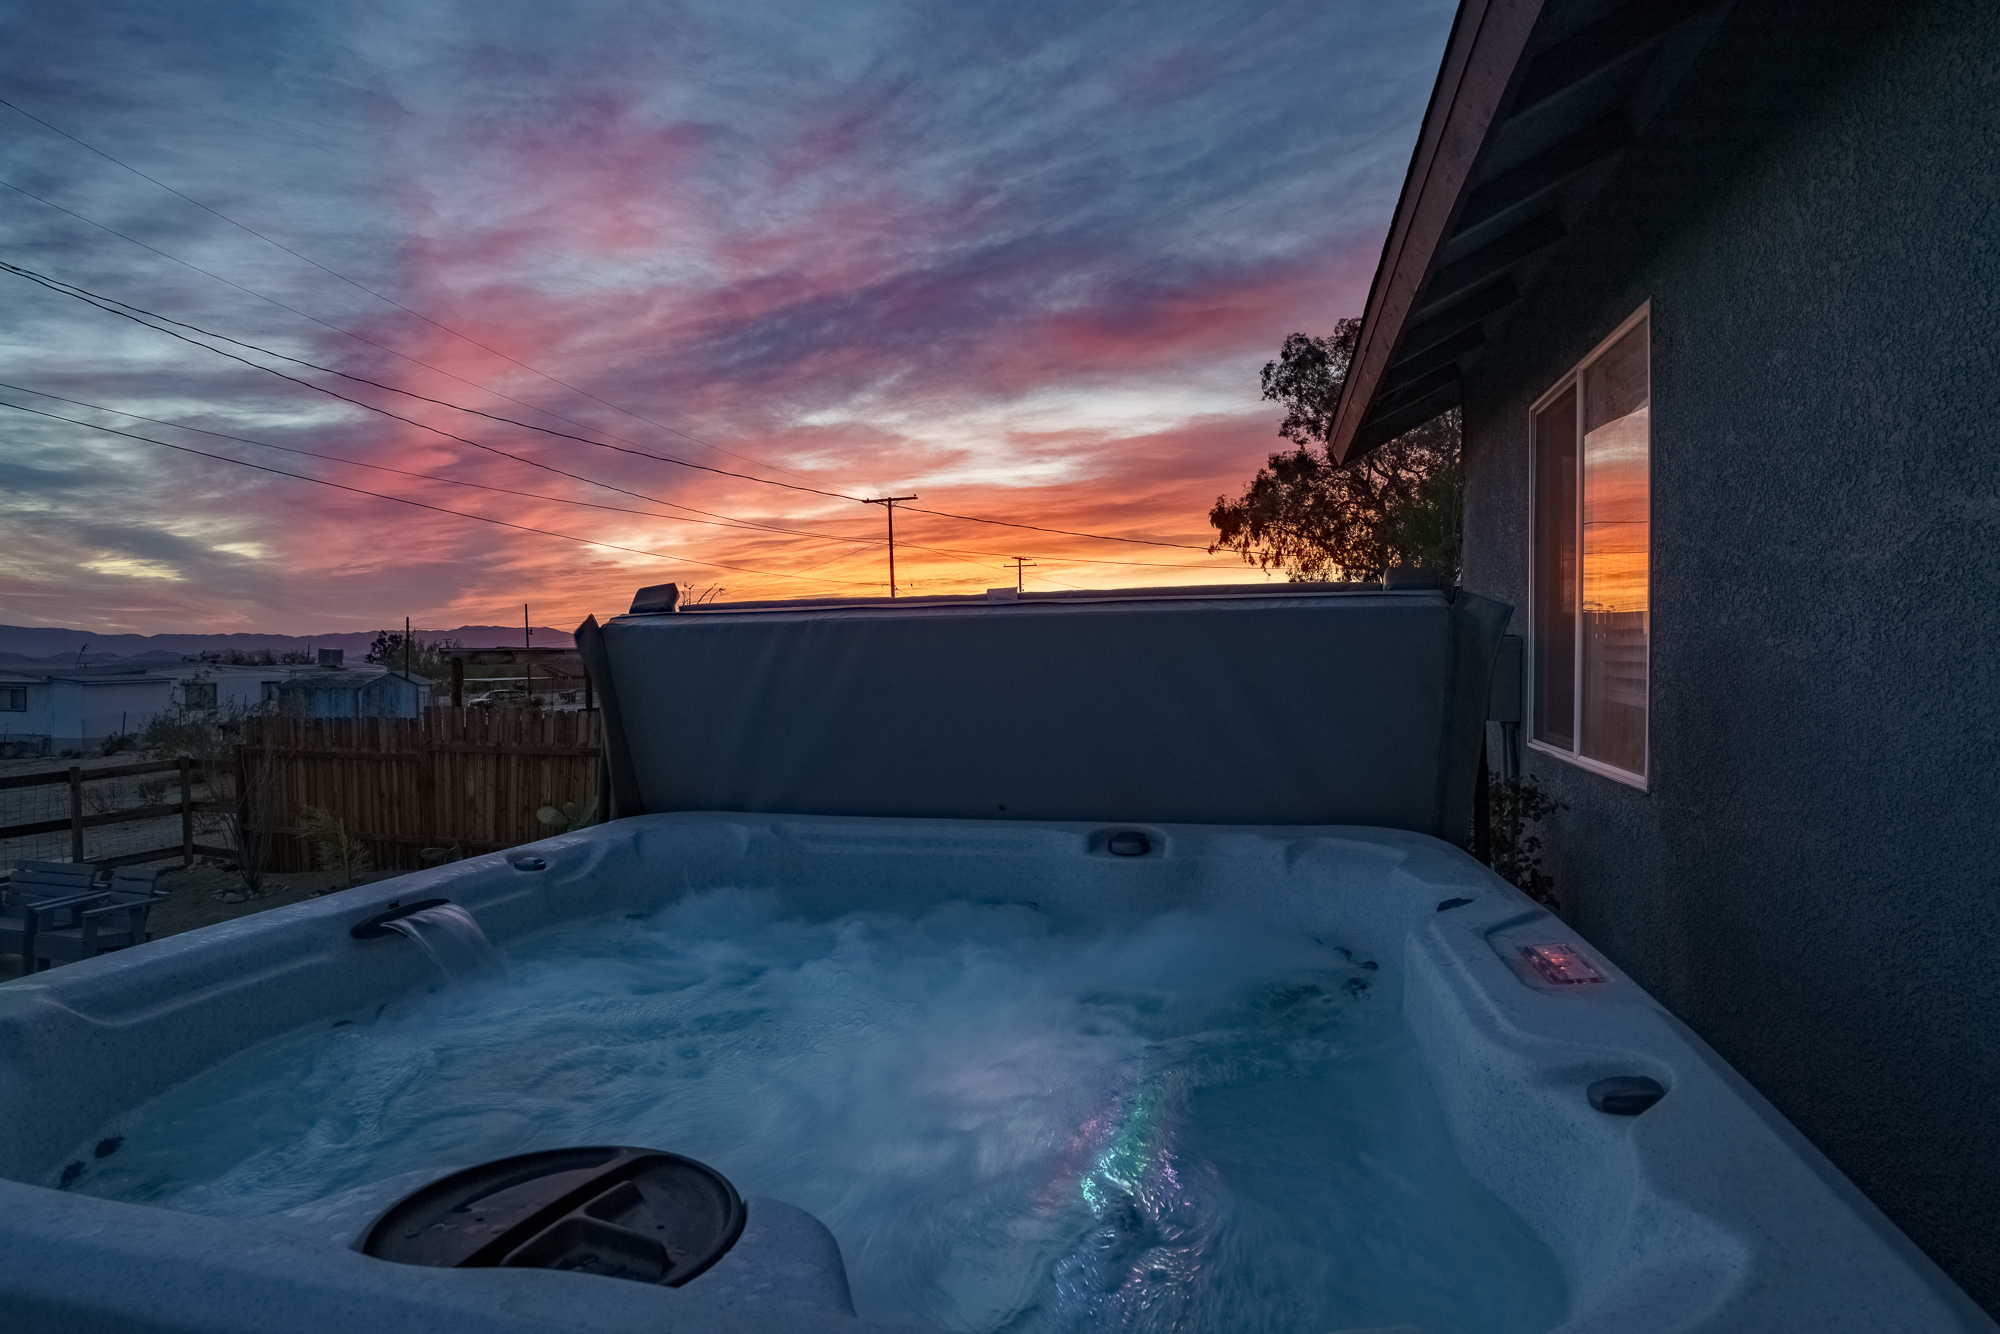 A relaxing hot tub in the foreground with a beautiful desert sunrise in the background, featuring pink and orange clouds and the rising sun.